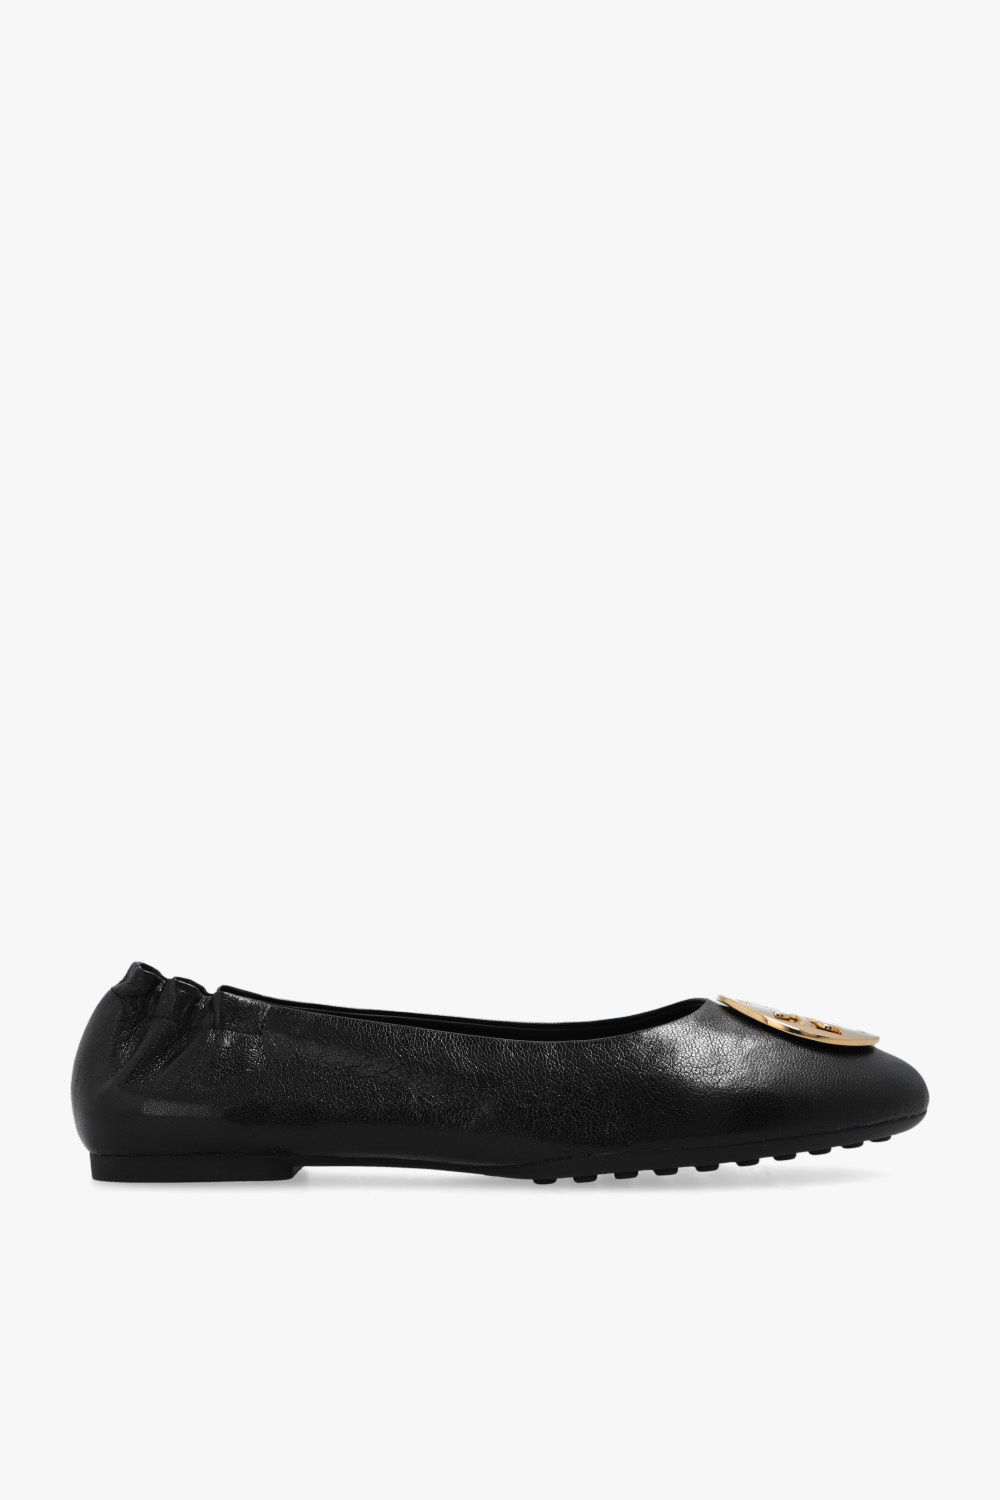 Tory Burch ‘Claire’ leather ballet Cuir